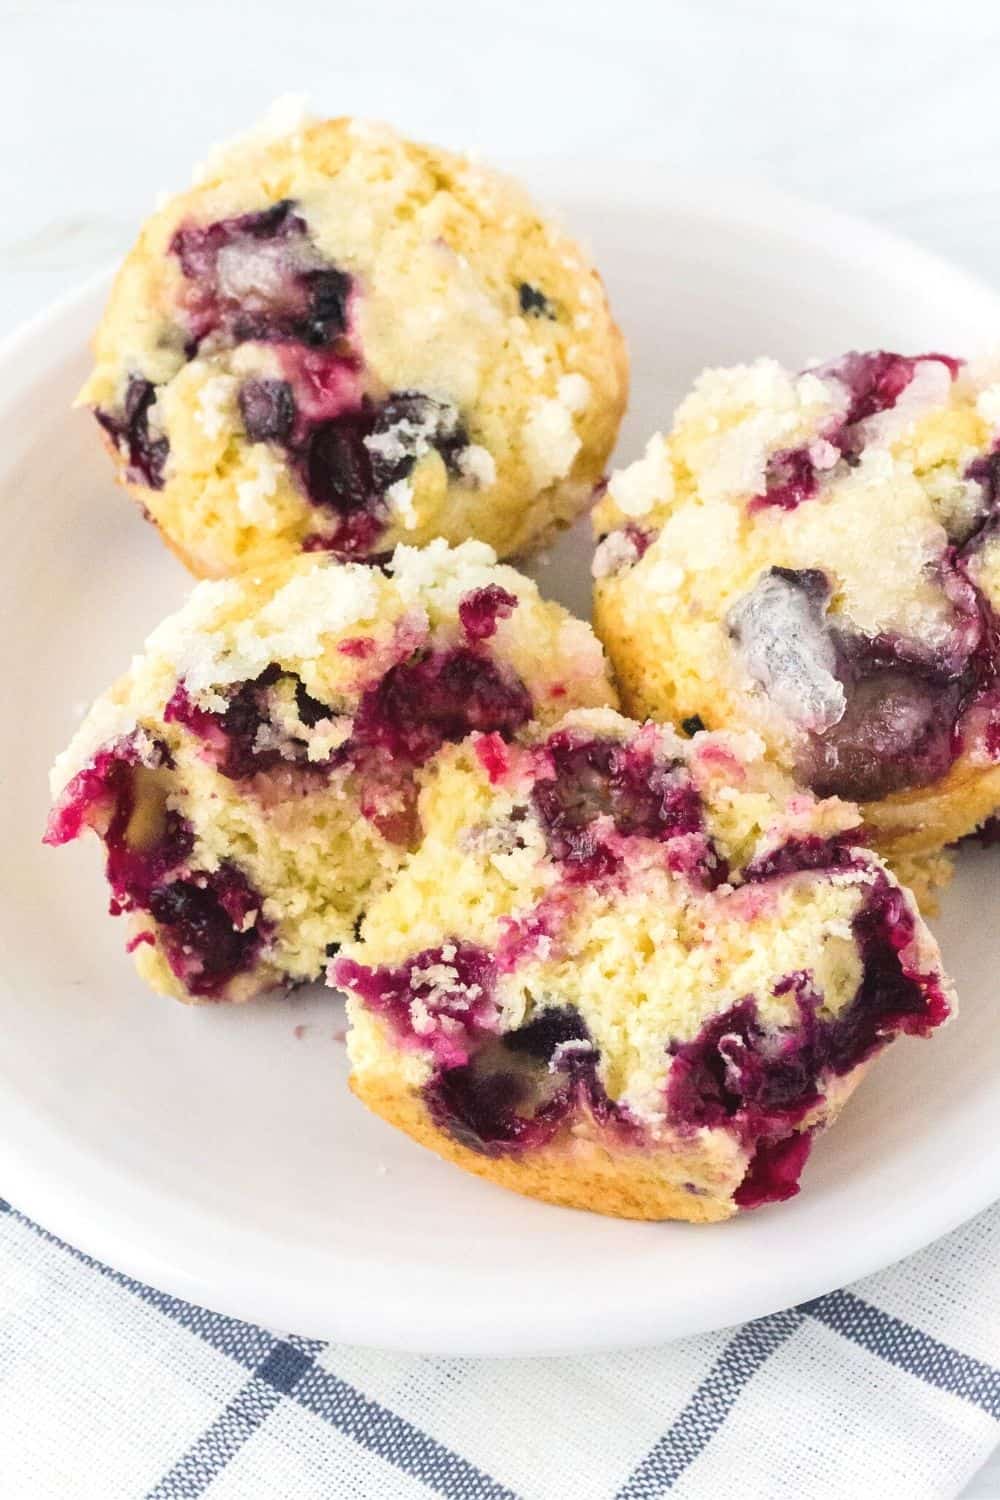 two blueberry streusel muffins on a white plate, along with a third muffin that has been cut in half, showing the burst blueberries inside the tender muffin